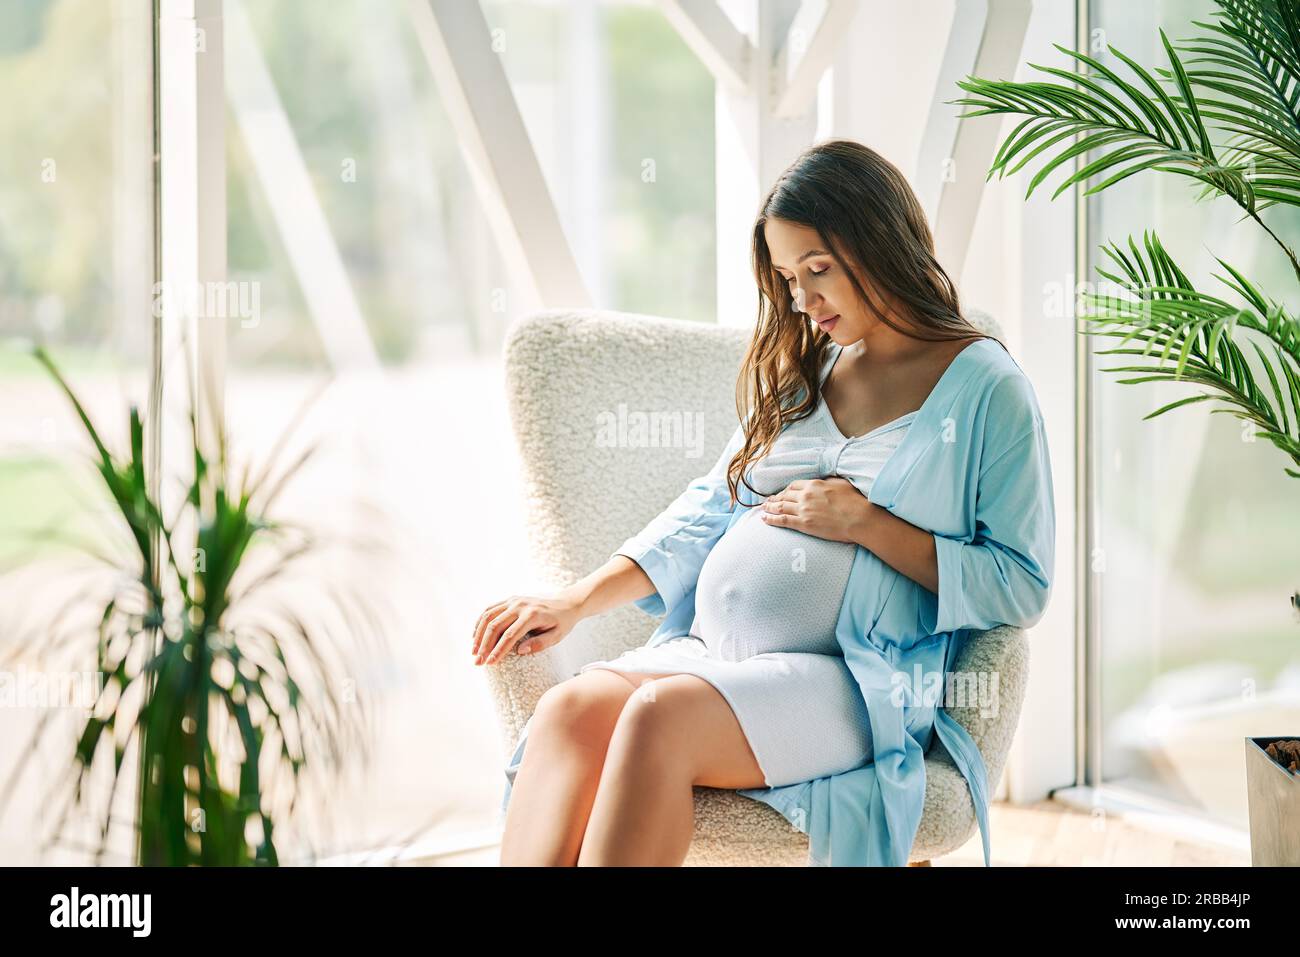 Pregnant happy woman touching her belly rest on chair at modern home. Tender mood photo of healthy pregnancy Stock Photo